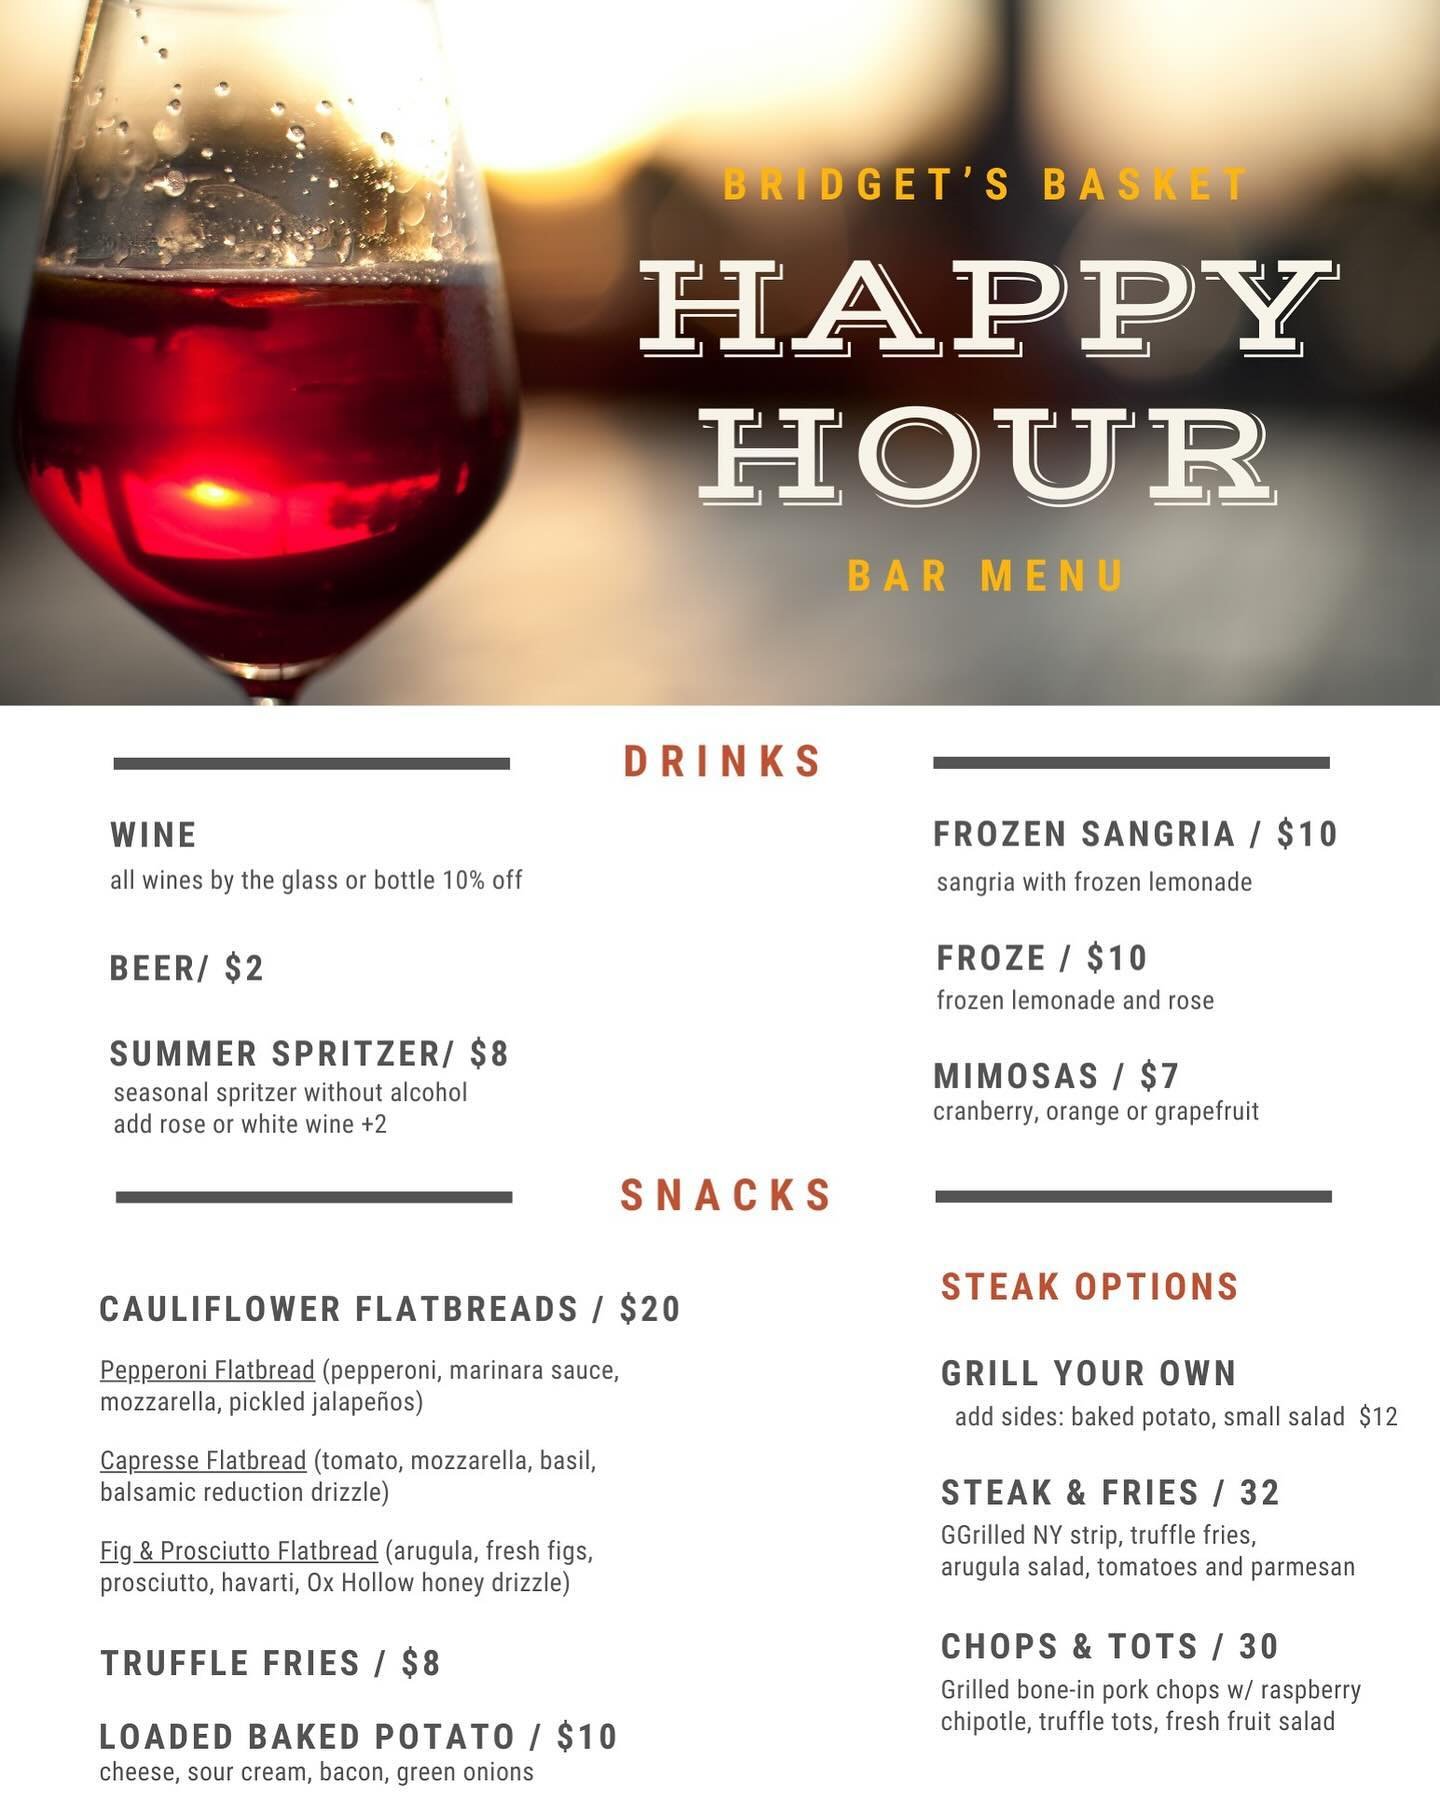 New Happy Hour menu, just in time for tonight&rsquo;s Happy Hour!!

Come join us tonight, with live music and lots of fun!